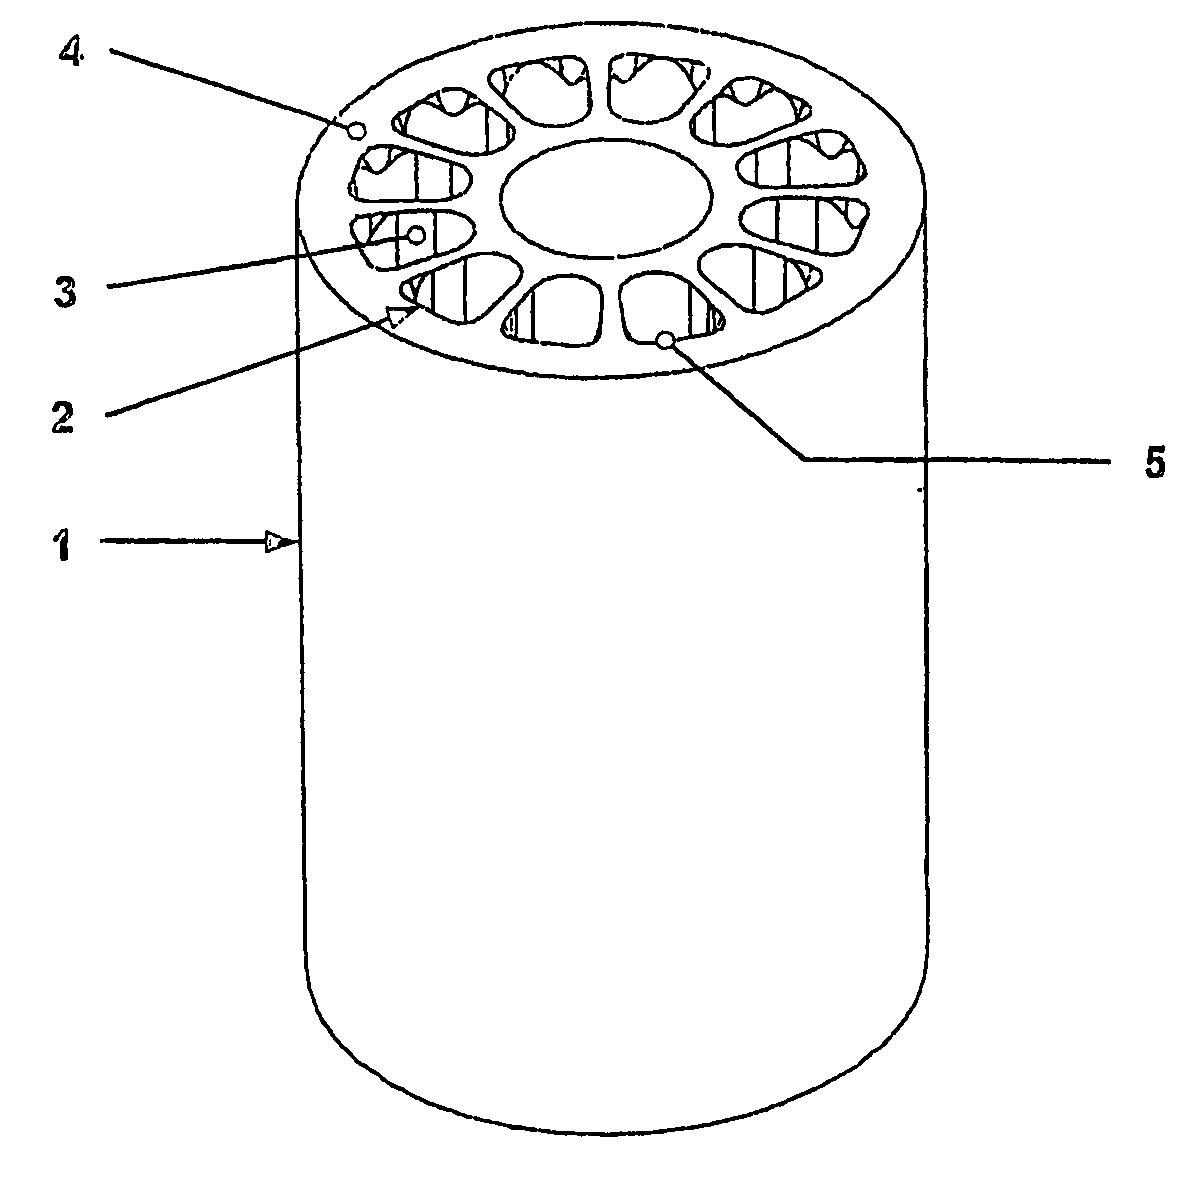 Channel form for a rotating pressure exchanger